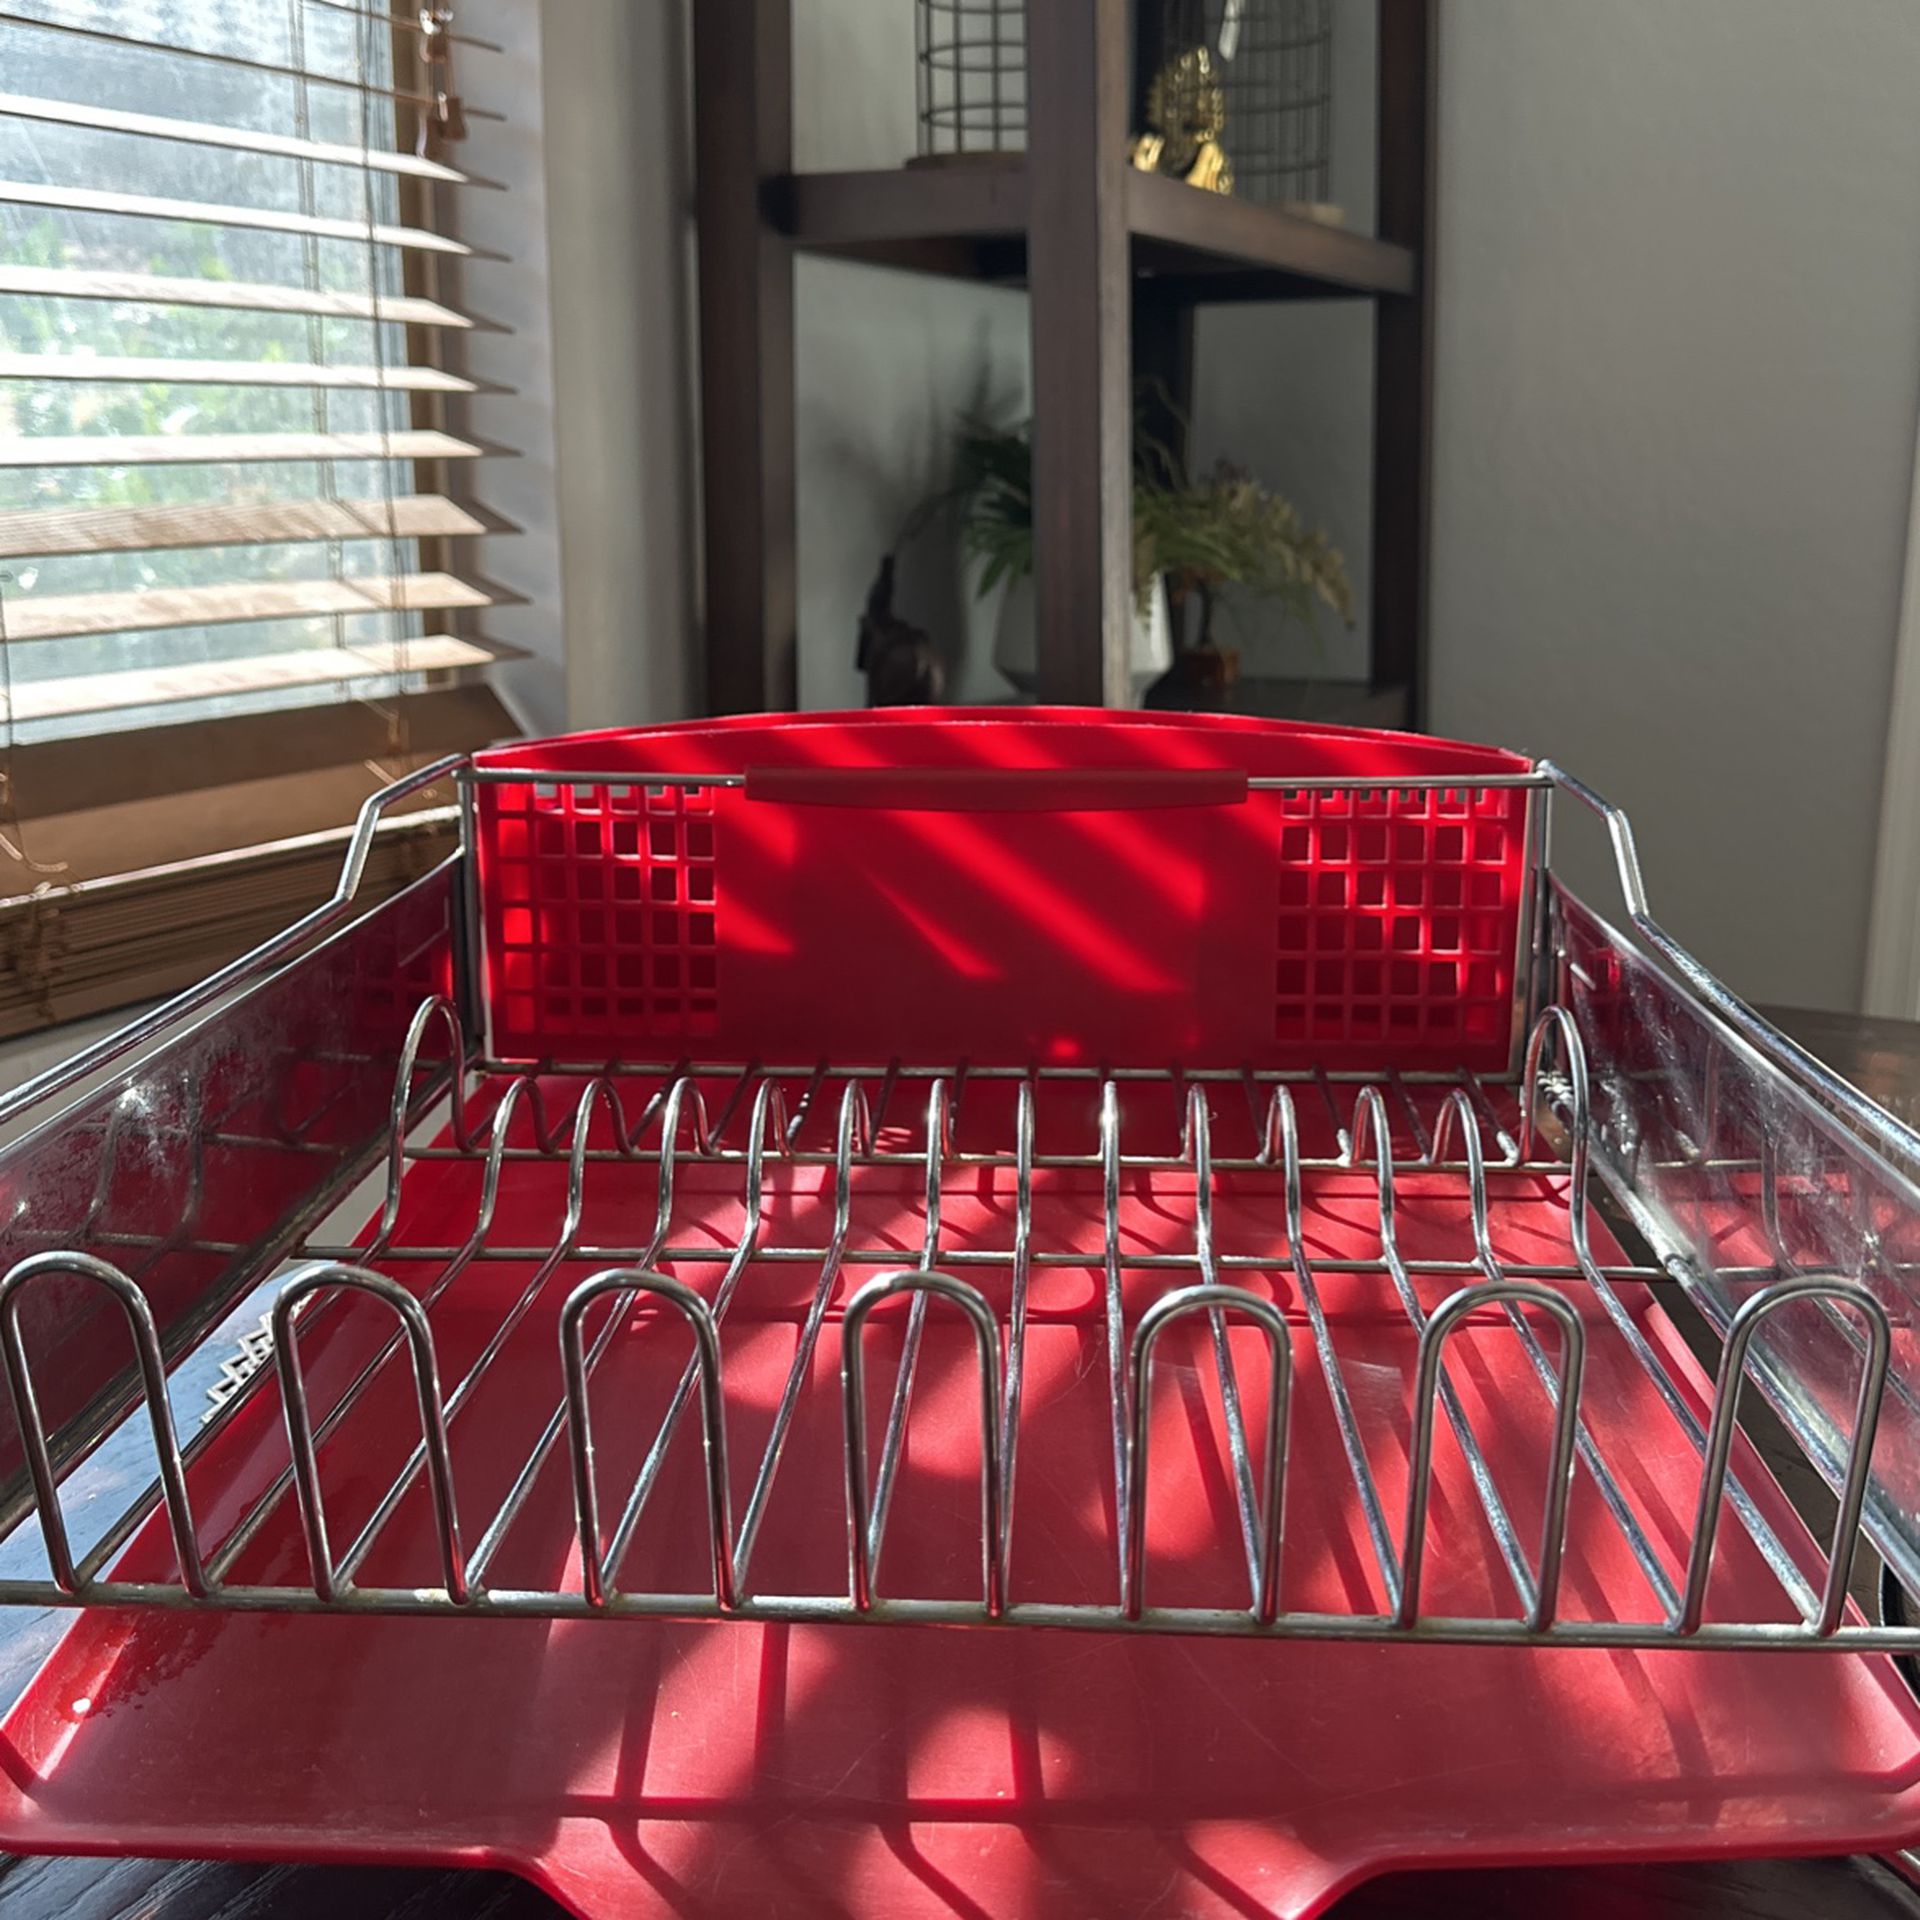 KitchenAid Long Dish Drying Rack for Sale in Chicago, IL - OfferUp